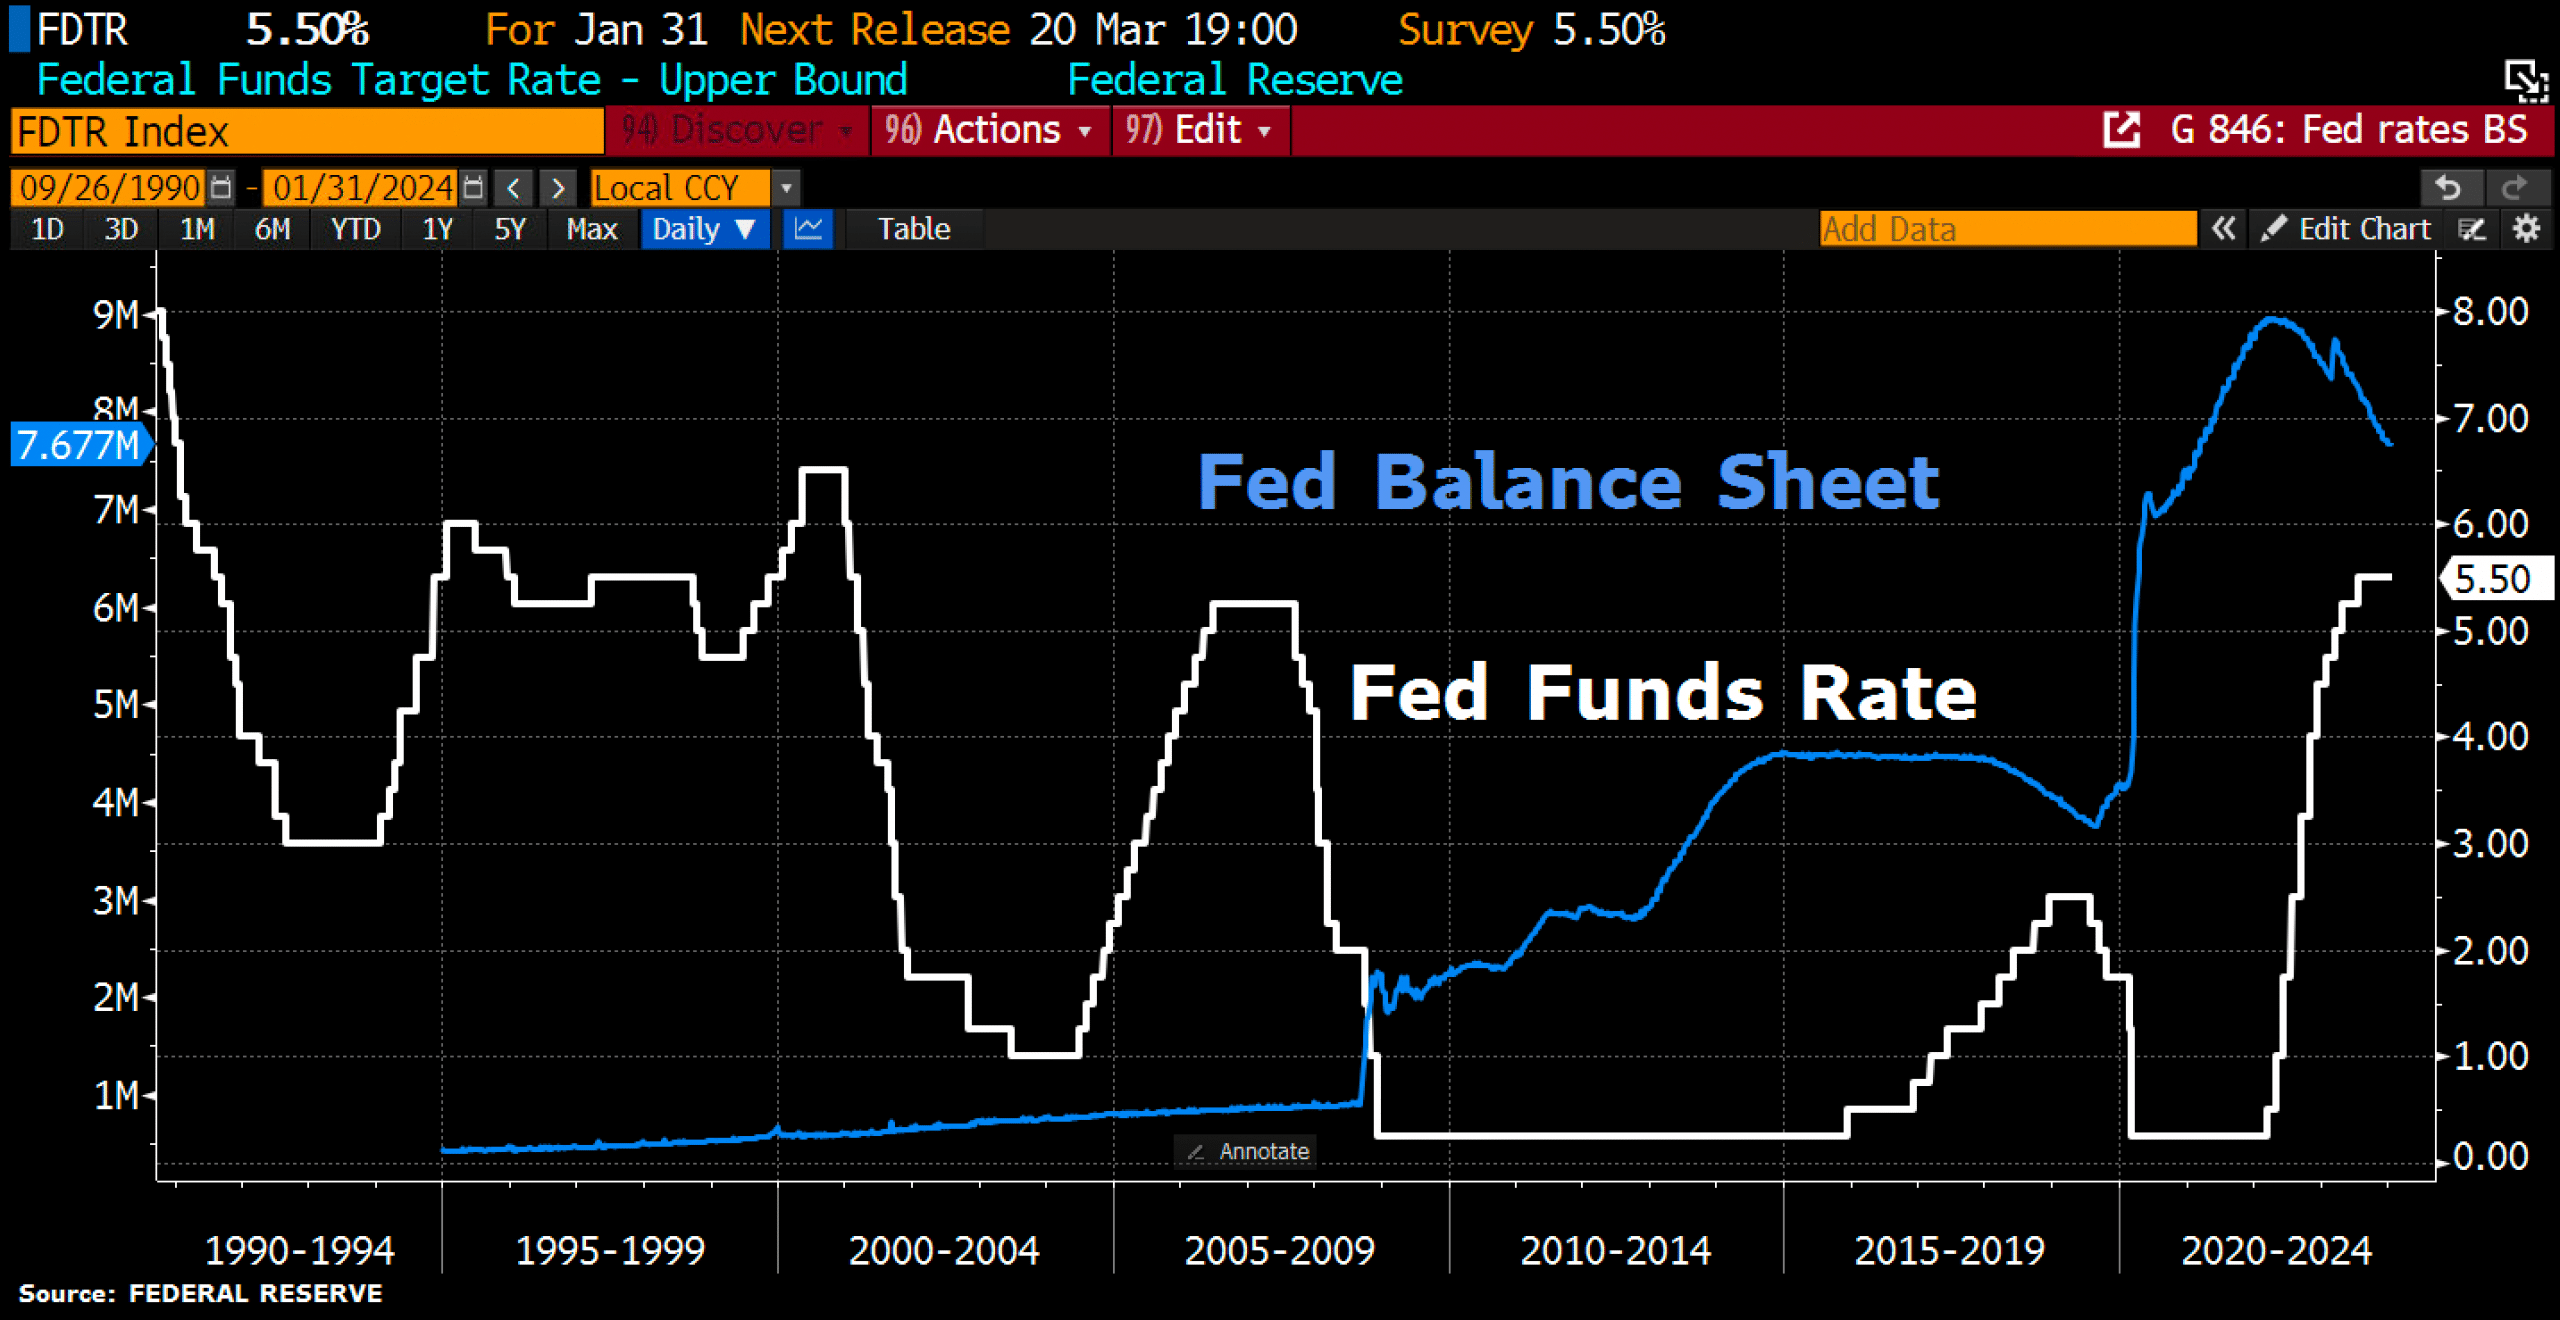 Fed Funds Target Rate